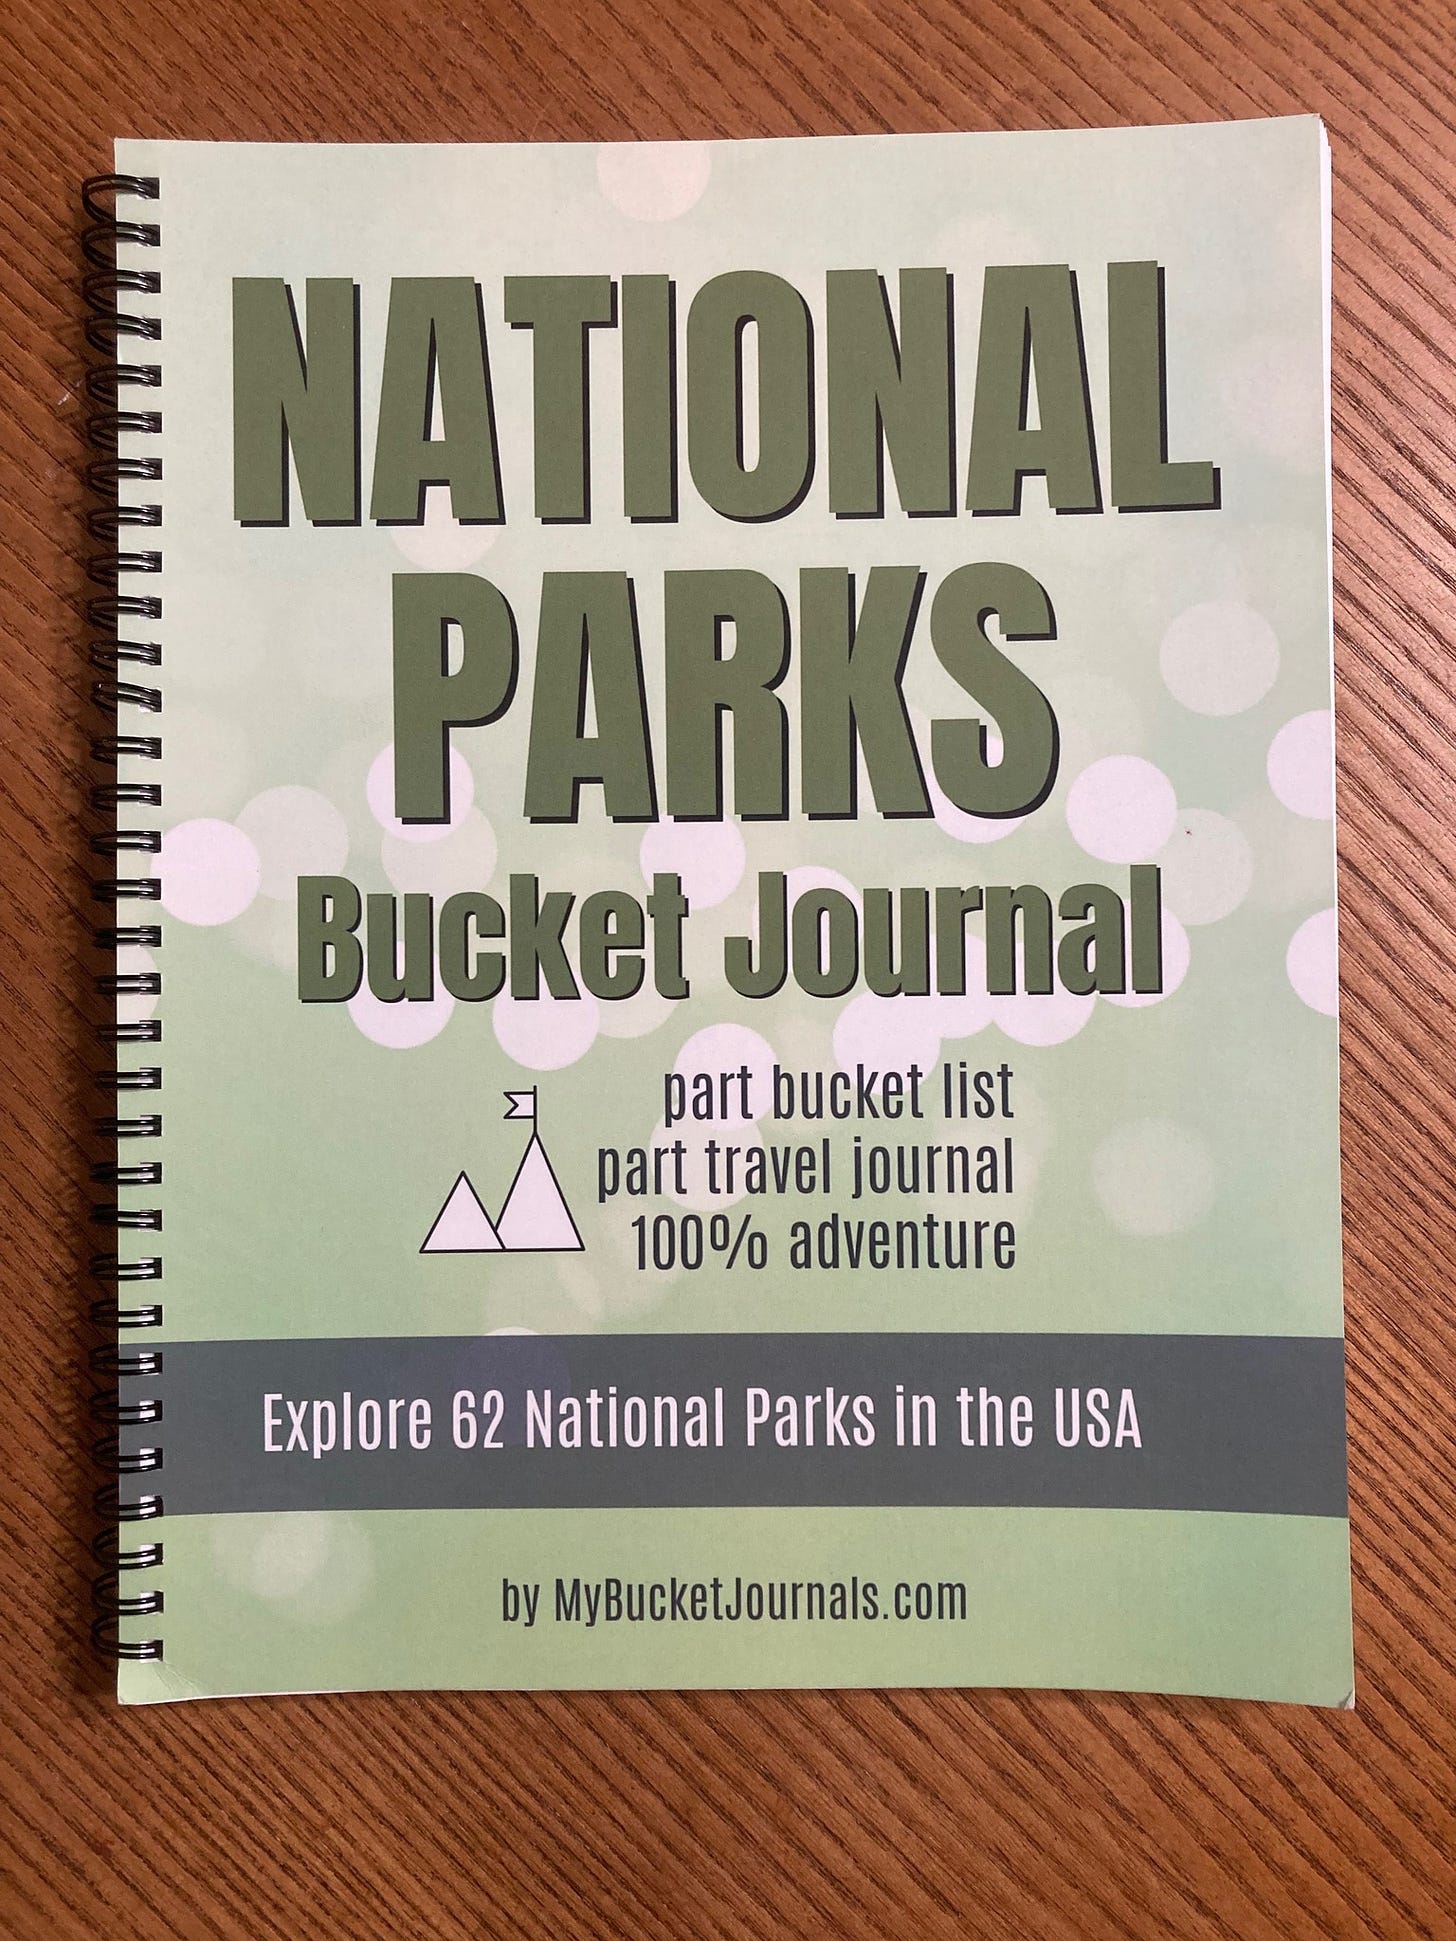 May be an image of ‎text that says '‎NATIONAL PARKS Bucket Journal part bucket list part travel journal 100% adventure Explore 62 National Parks in the USA _ور byMyBucketJournals.com‎'‎